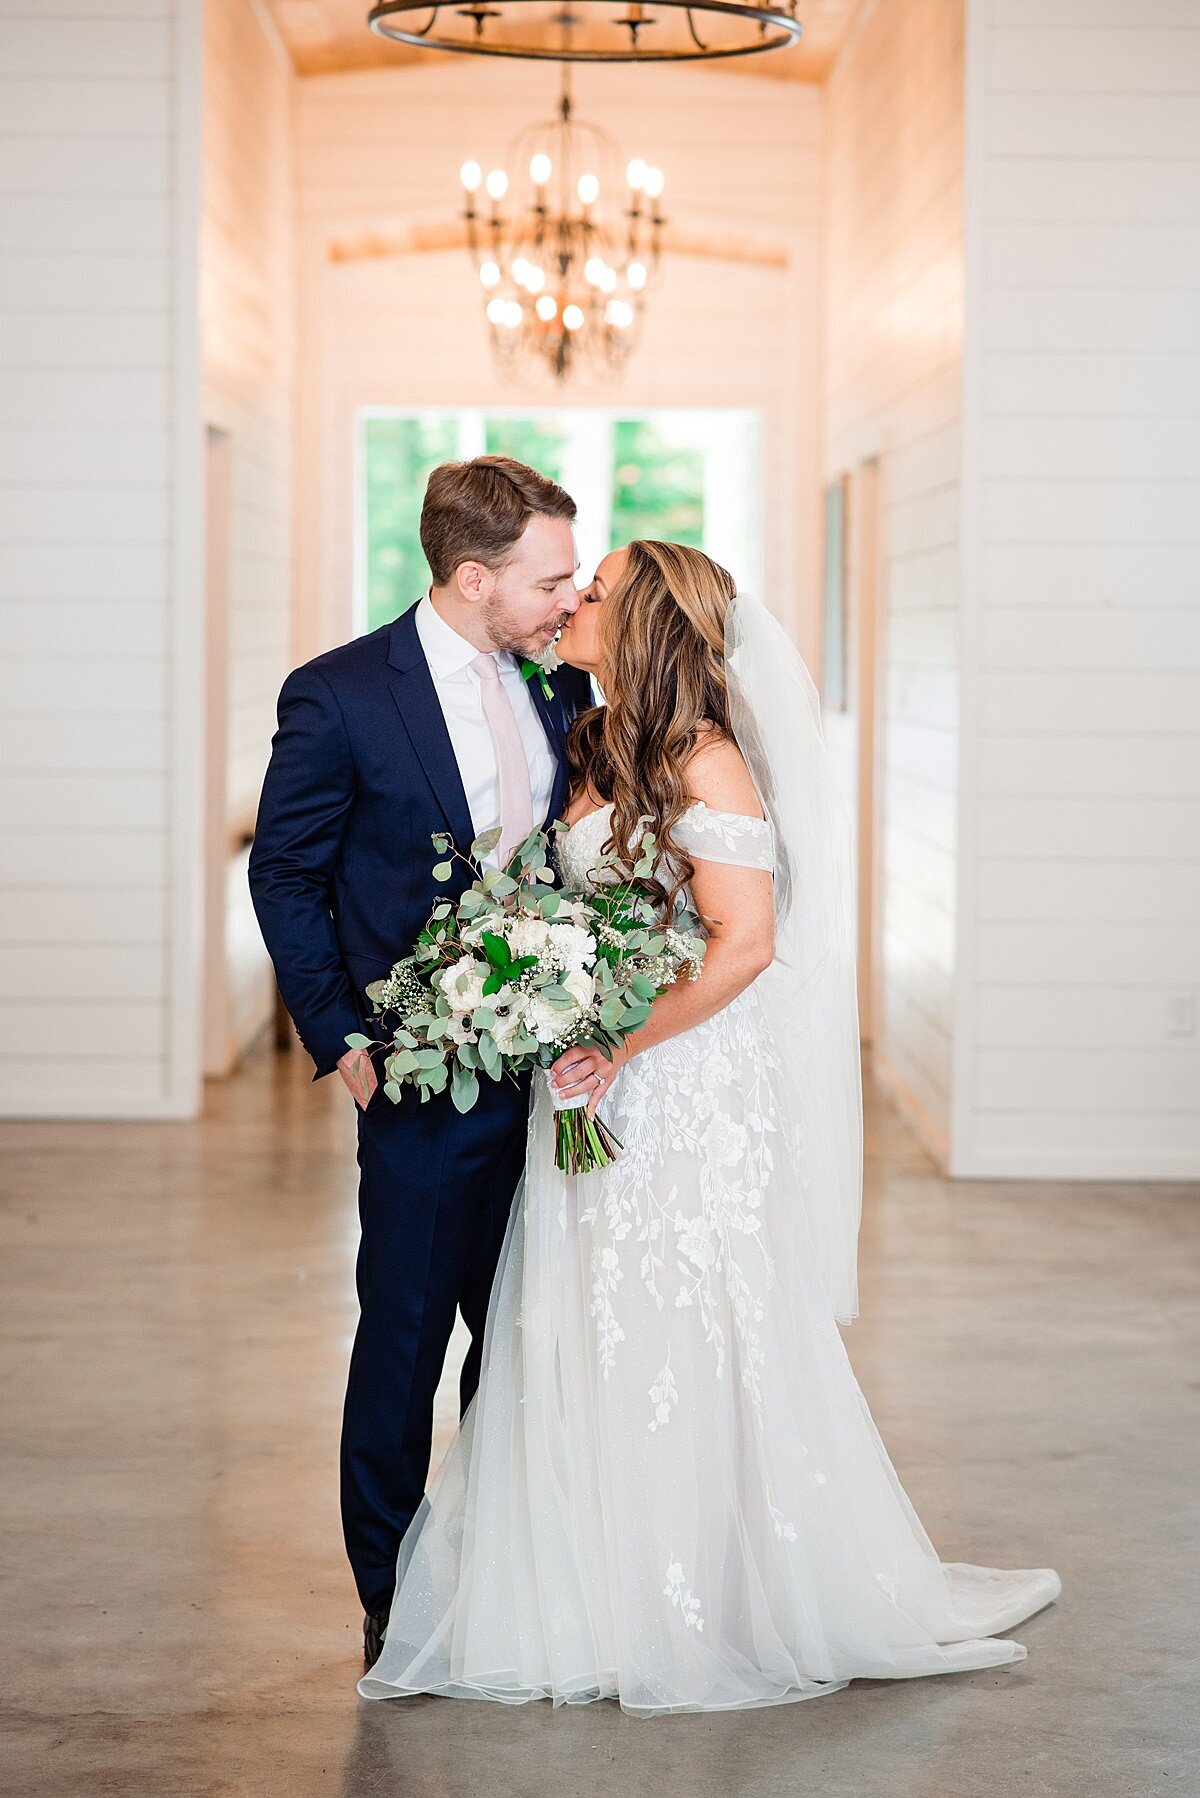 Formal portrait of bride and groom in the outdoor reception hall with chandeliers above them